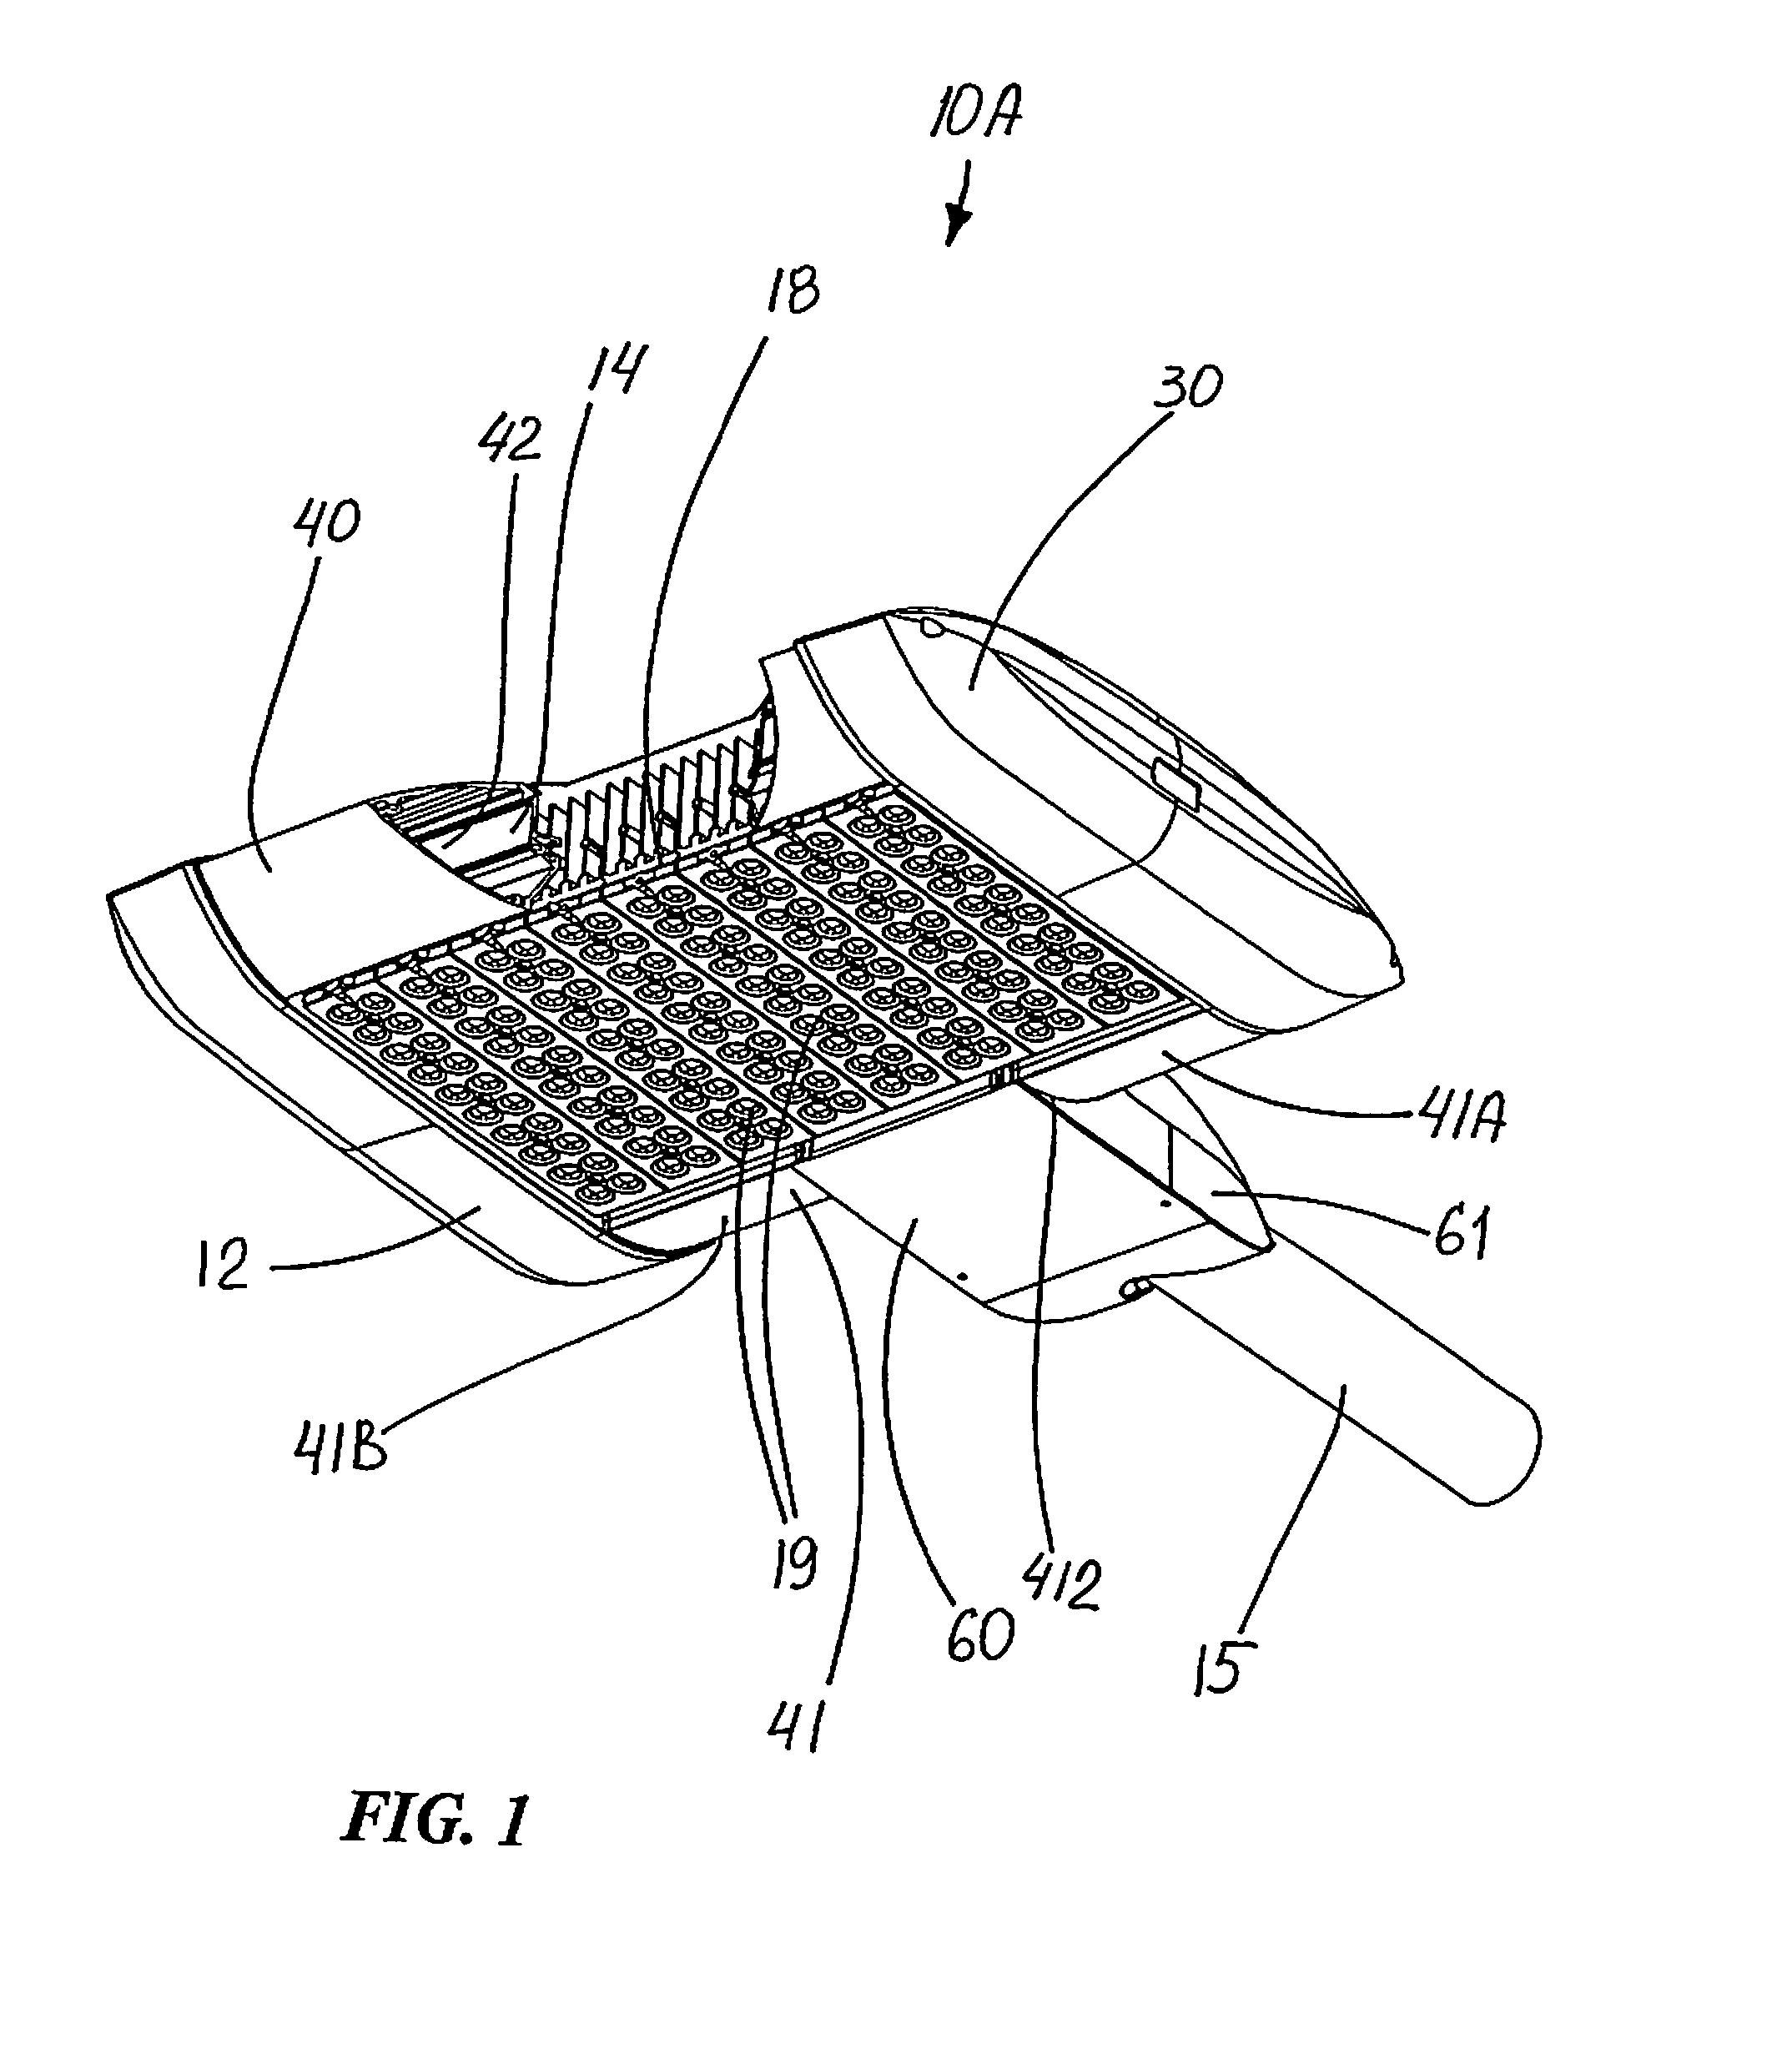 Power supply mounting apparatus for lighting fixture